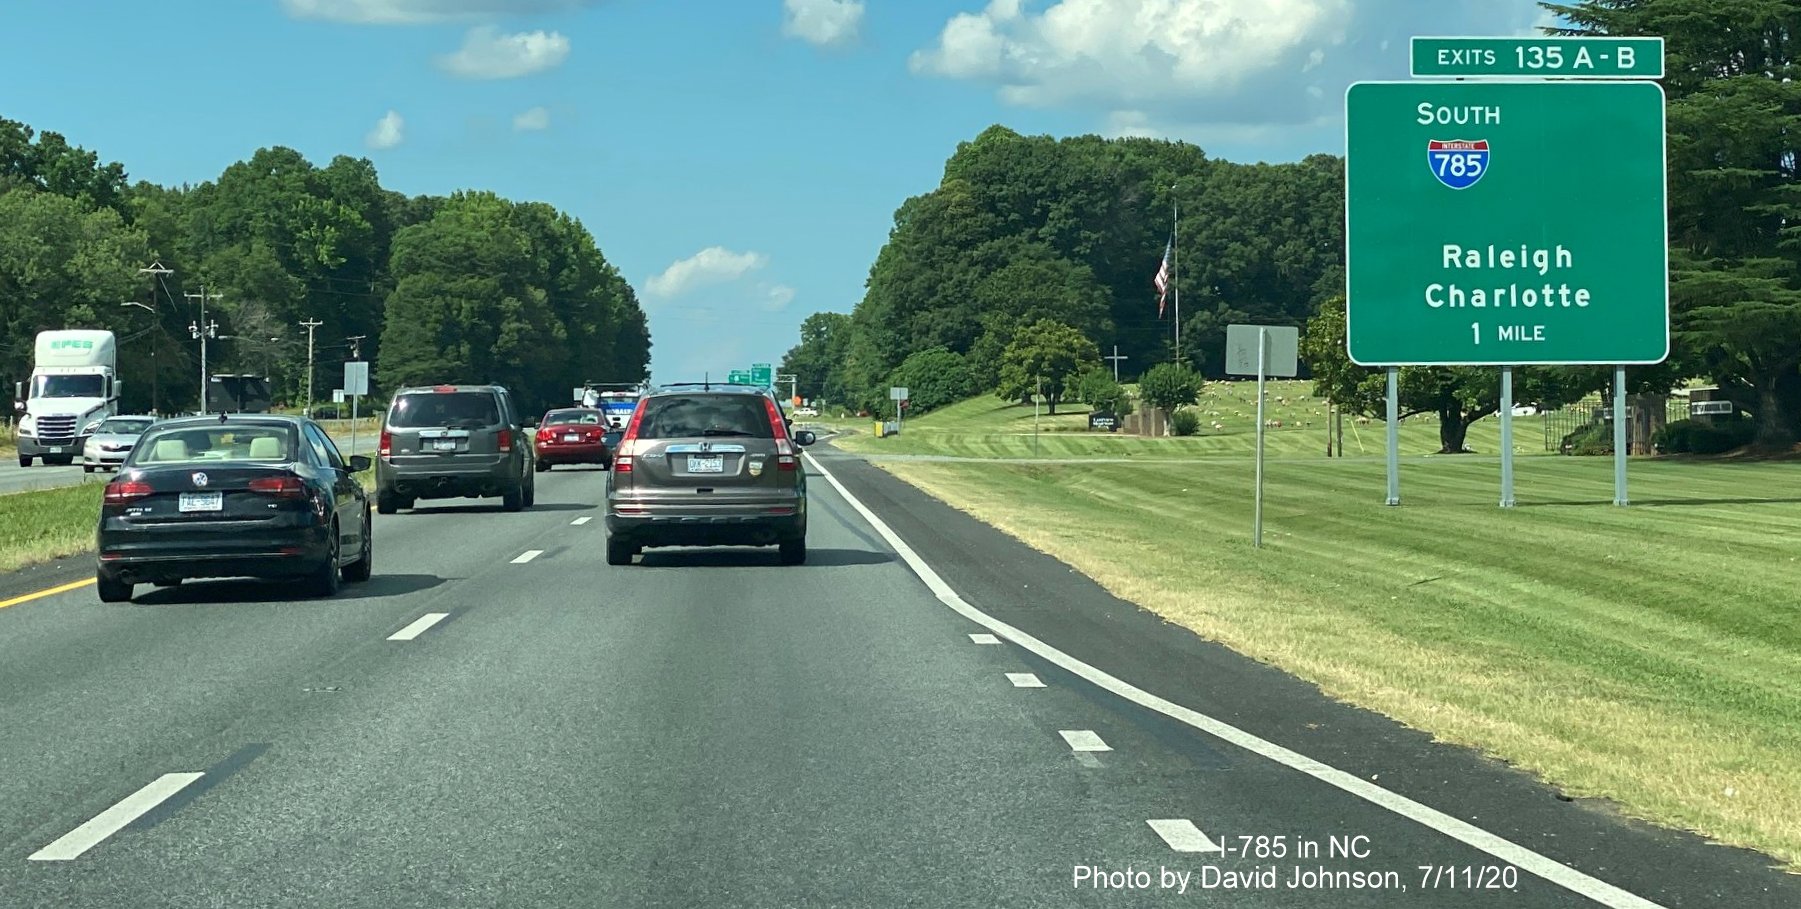 Image of ground mounted 1-Mile advance sign for I-785 South Greensboro Urban Loop on US 29 North, by David Johnson July 2020